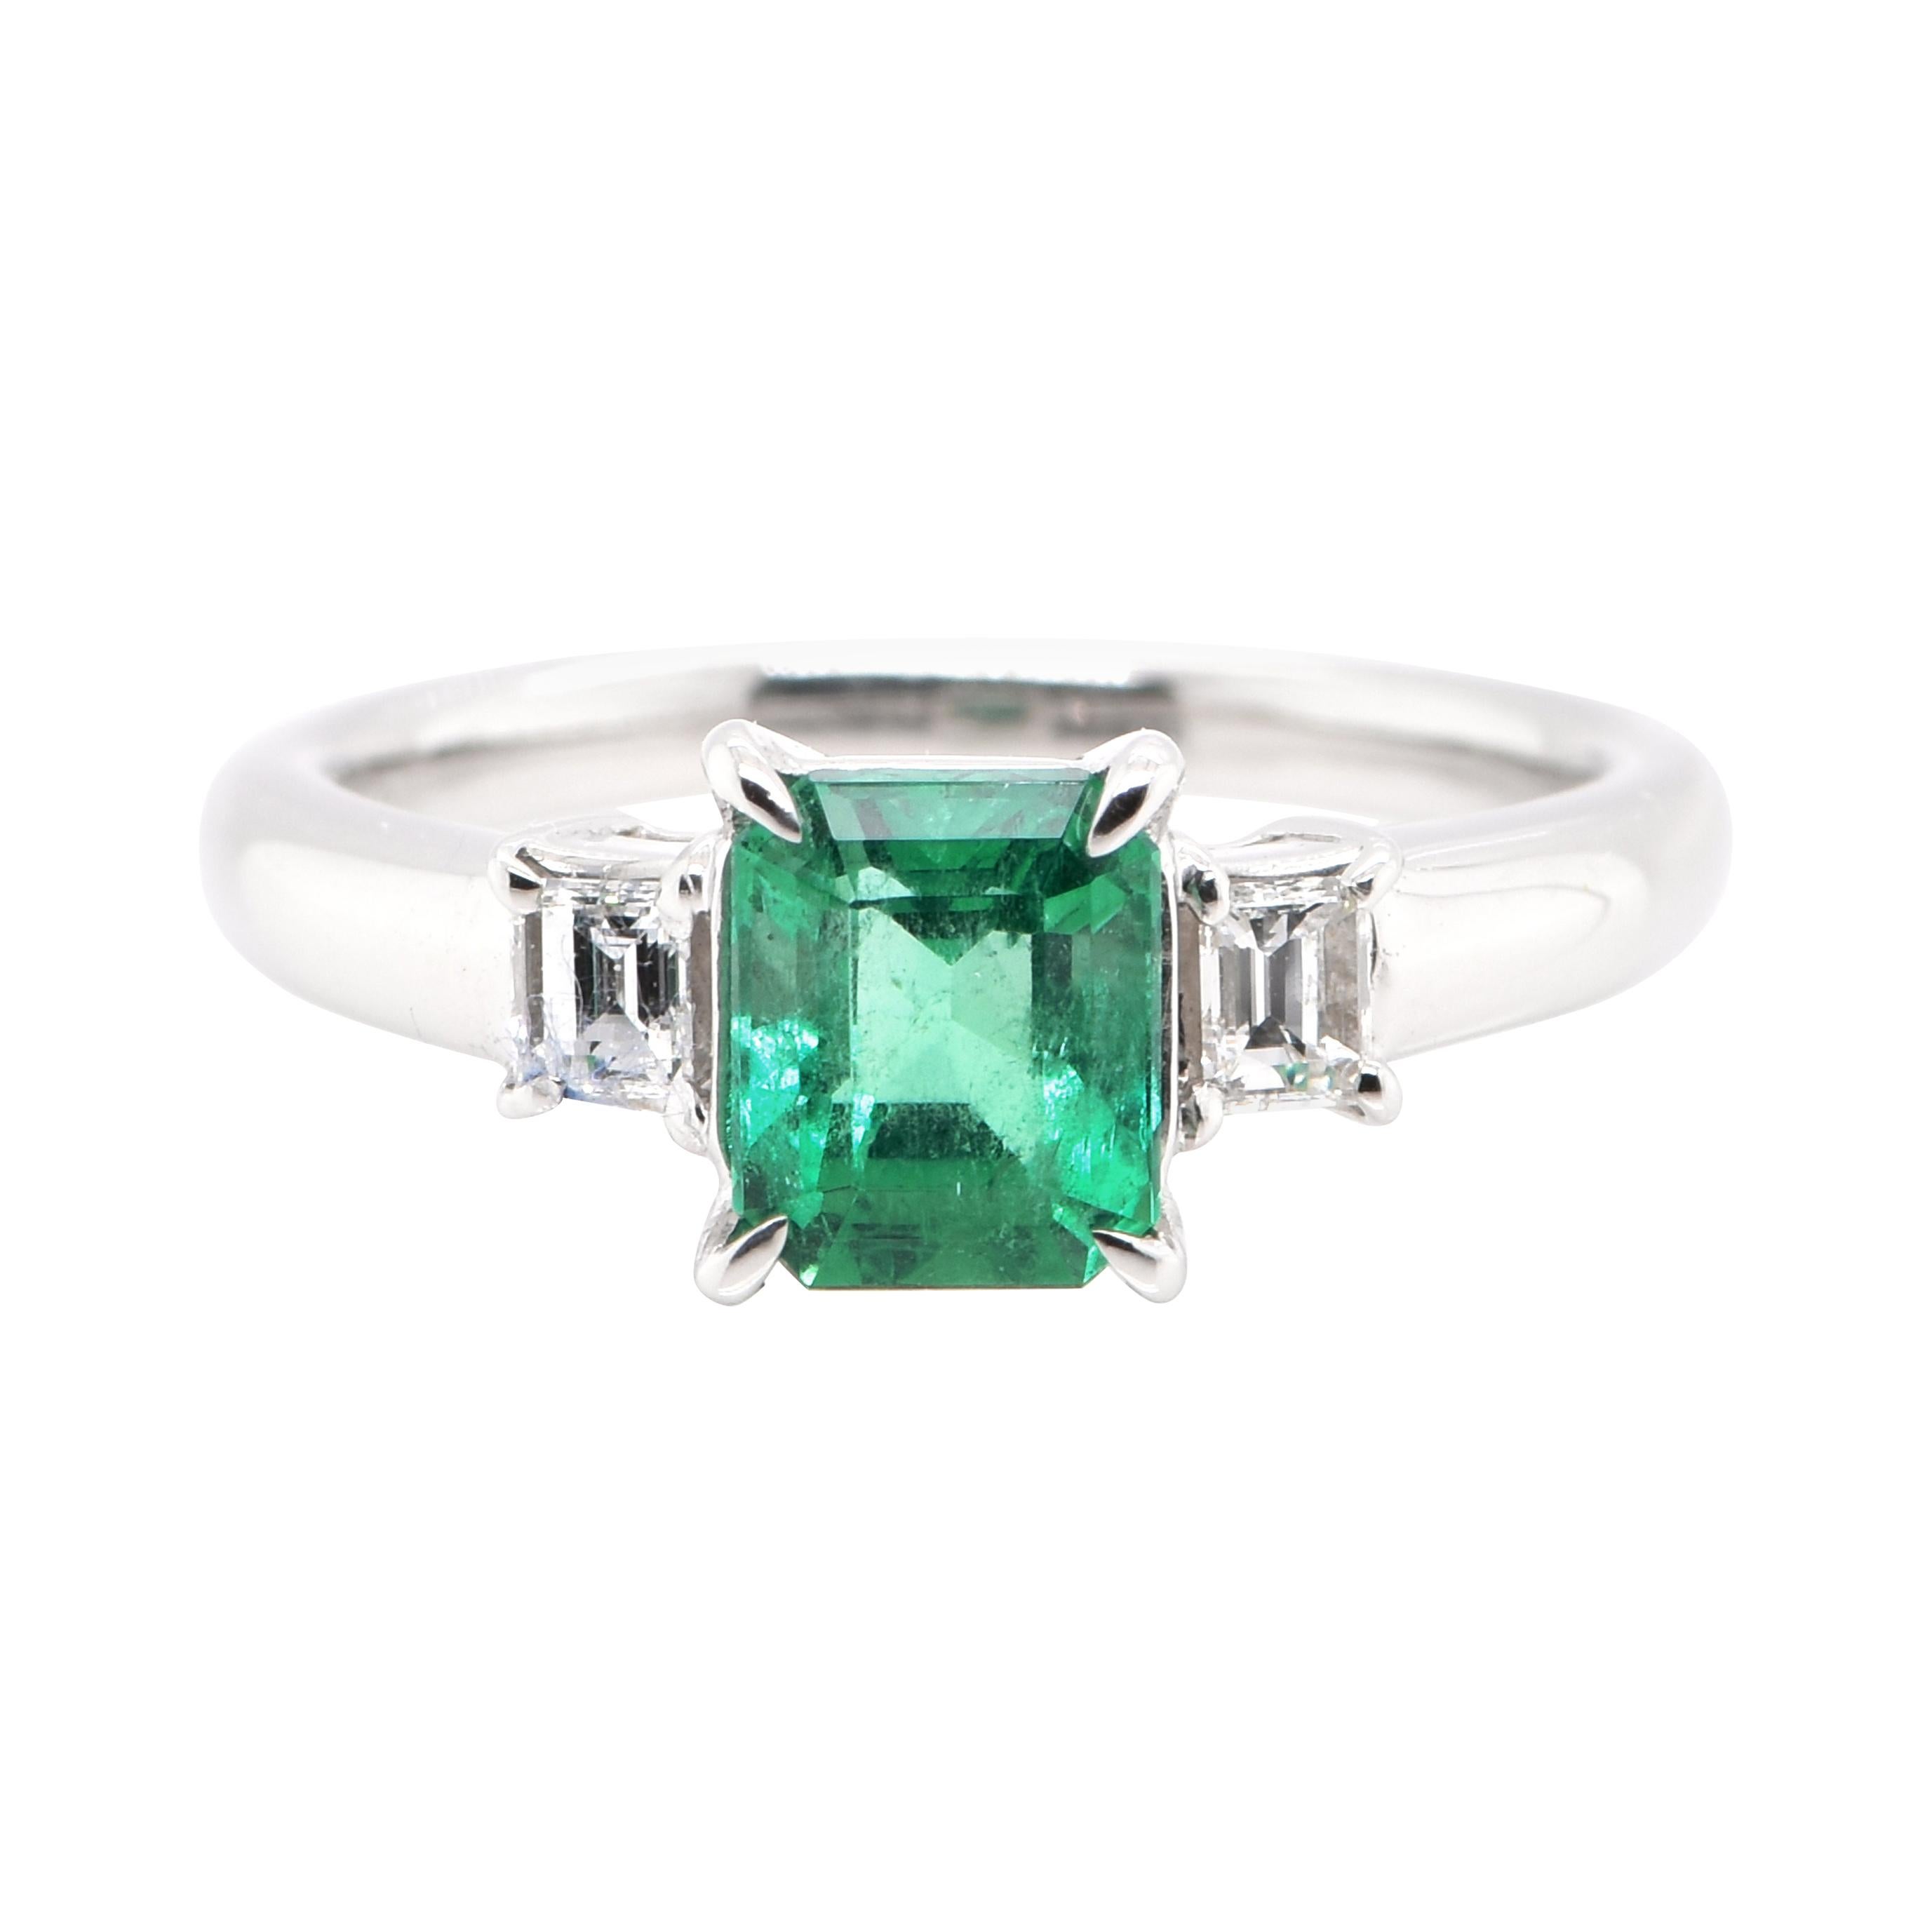 1.08 Carat Natural Colombian Emerald Three Stone Ring Set in Platinum